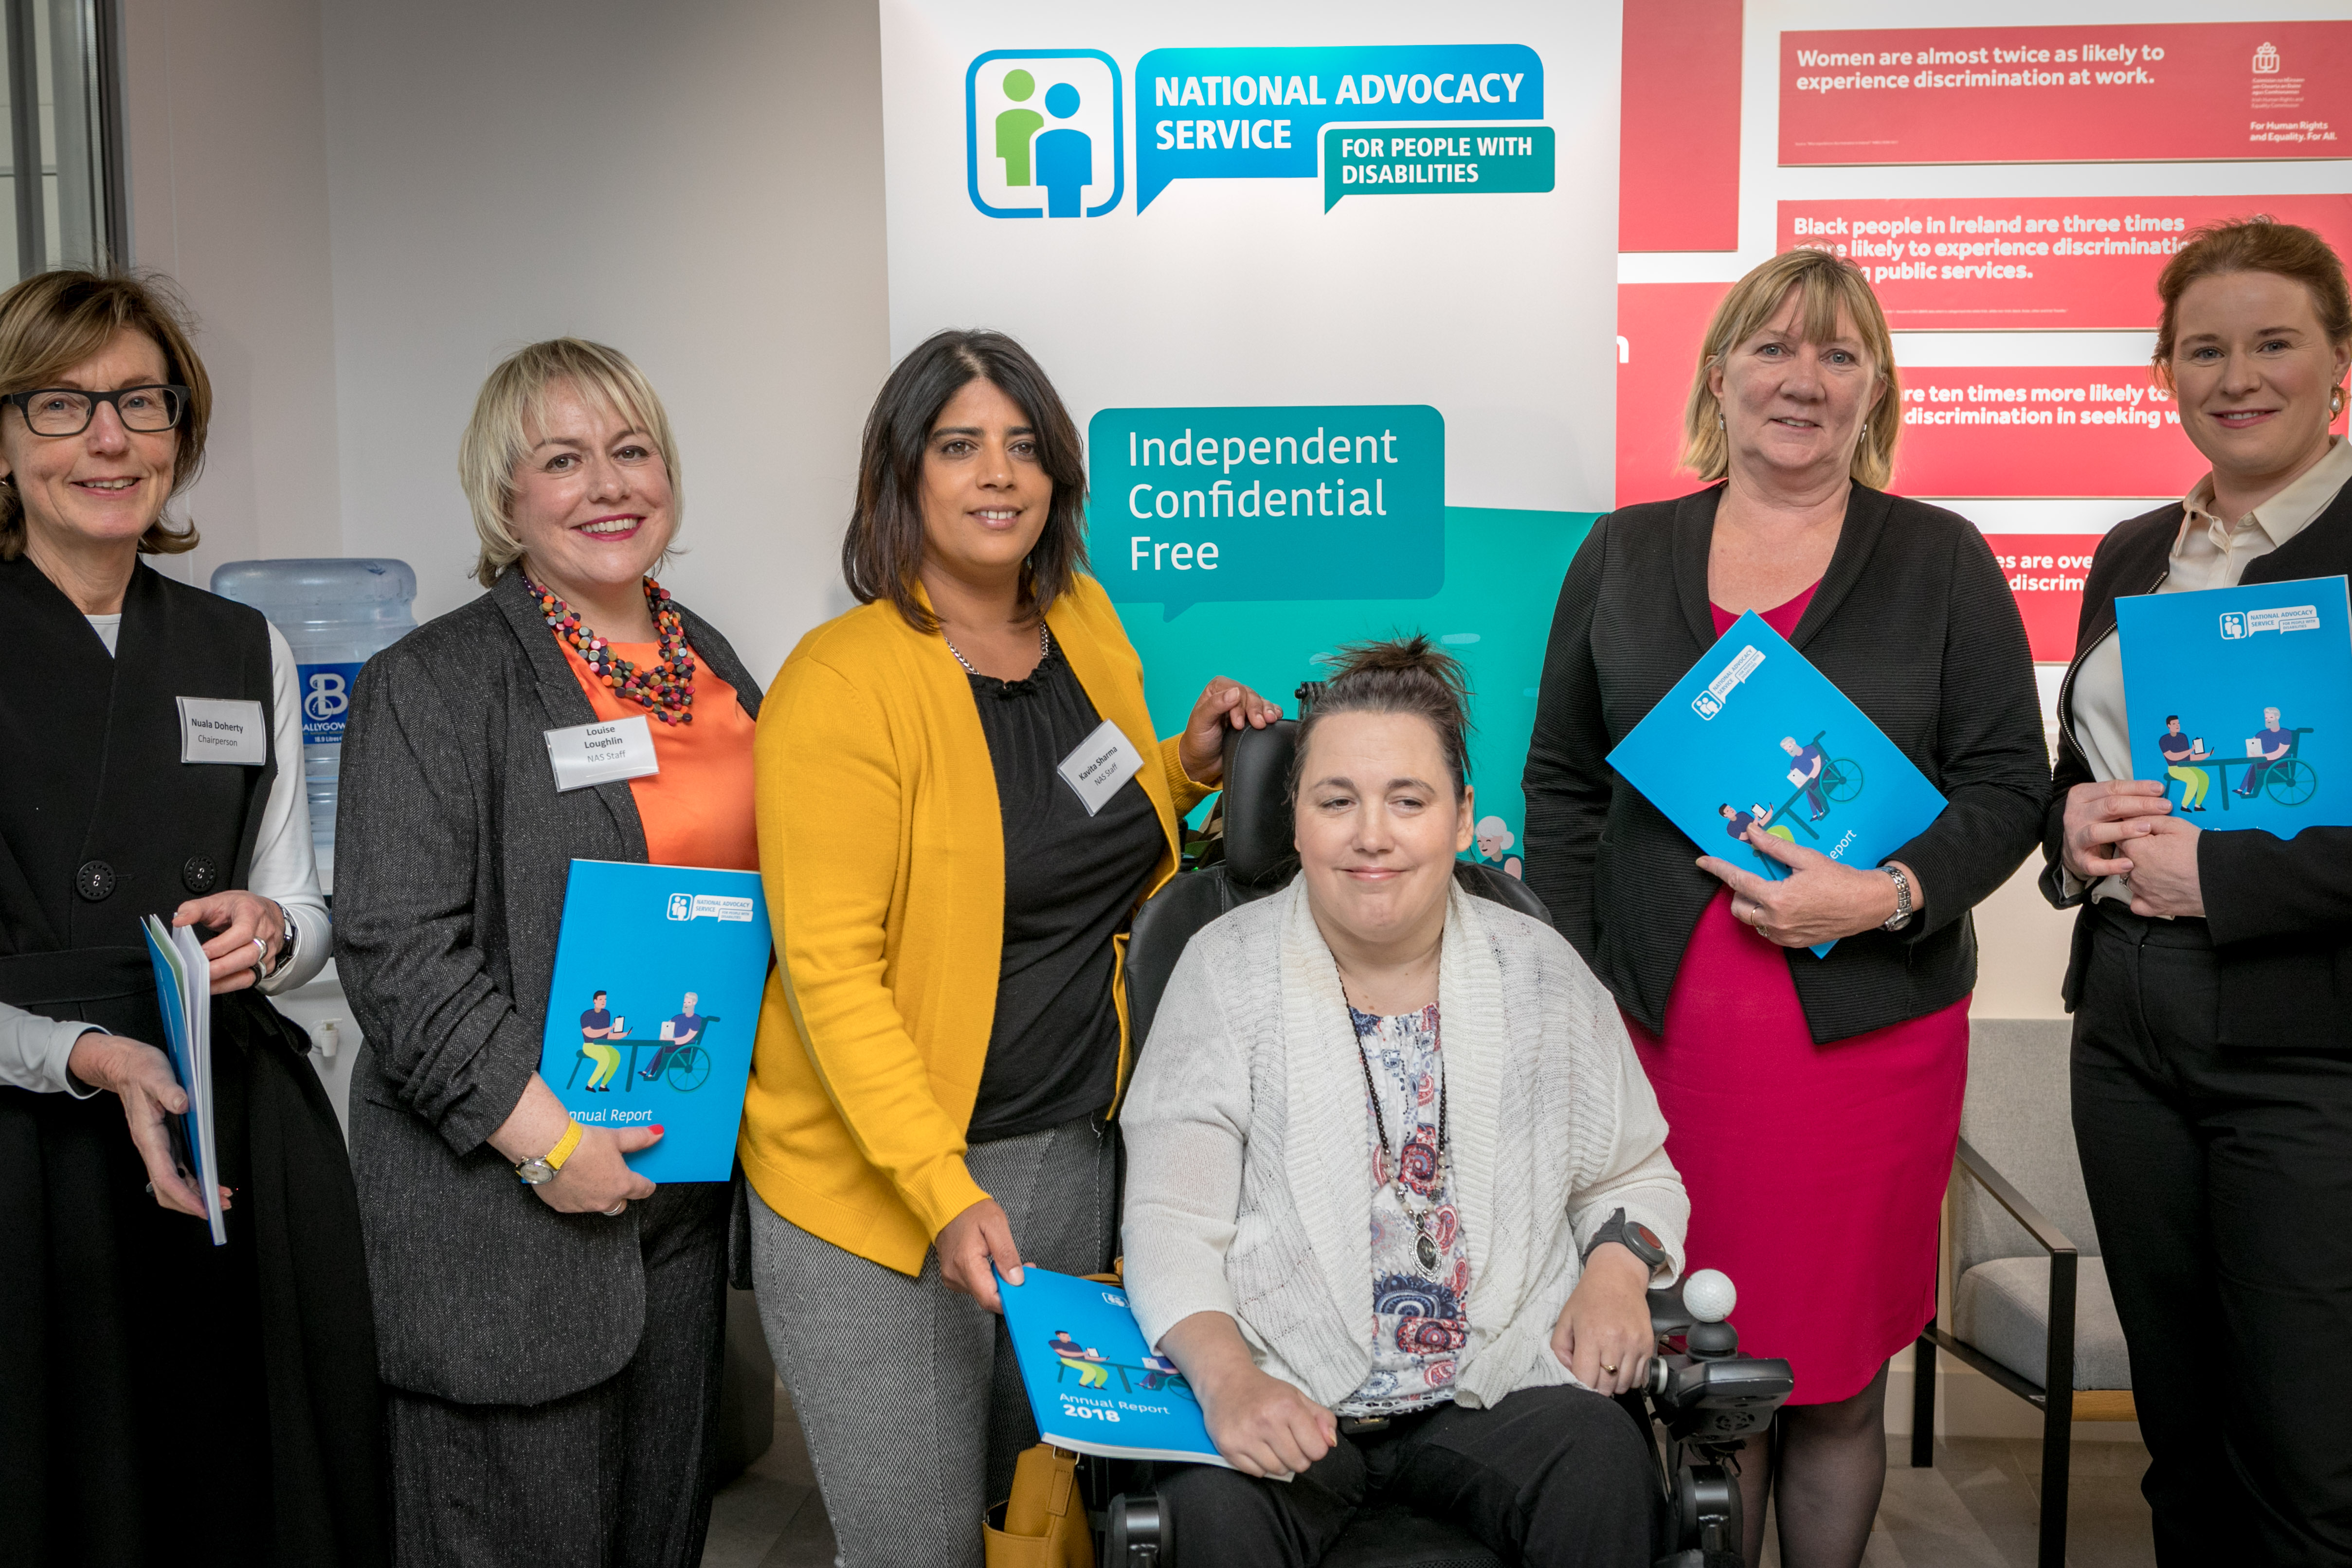 Pictured at the launch were(L-R) Nuala Doherty- Chairperson of NAS Board, Louise Loughlin- NAS National Manager, Kavita Sharma- NAS Advocate,  Liz Halton- Self-Advocate, Angela Black- Chief Executive CIB and Sarah O'Callaghan, DEASP